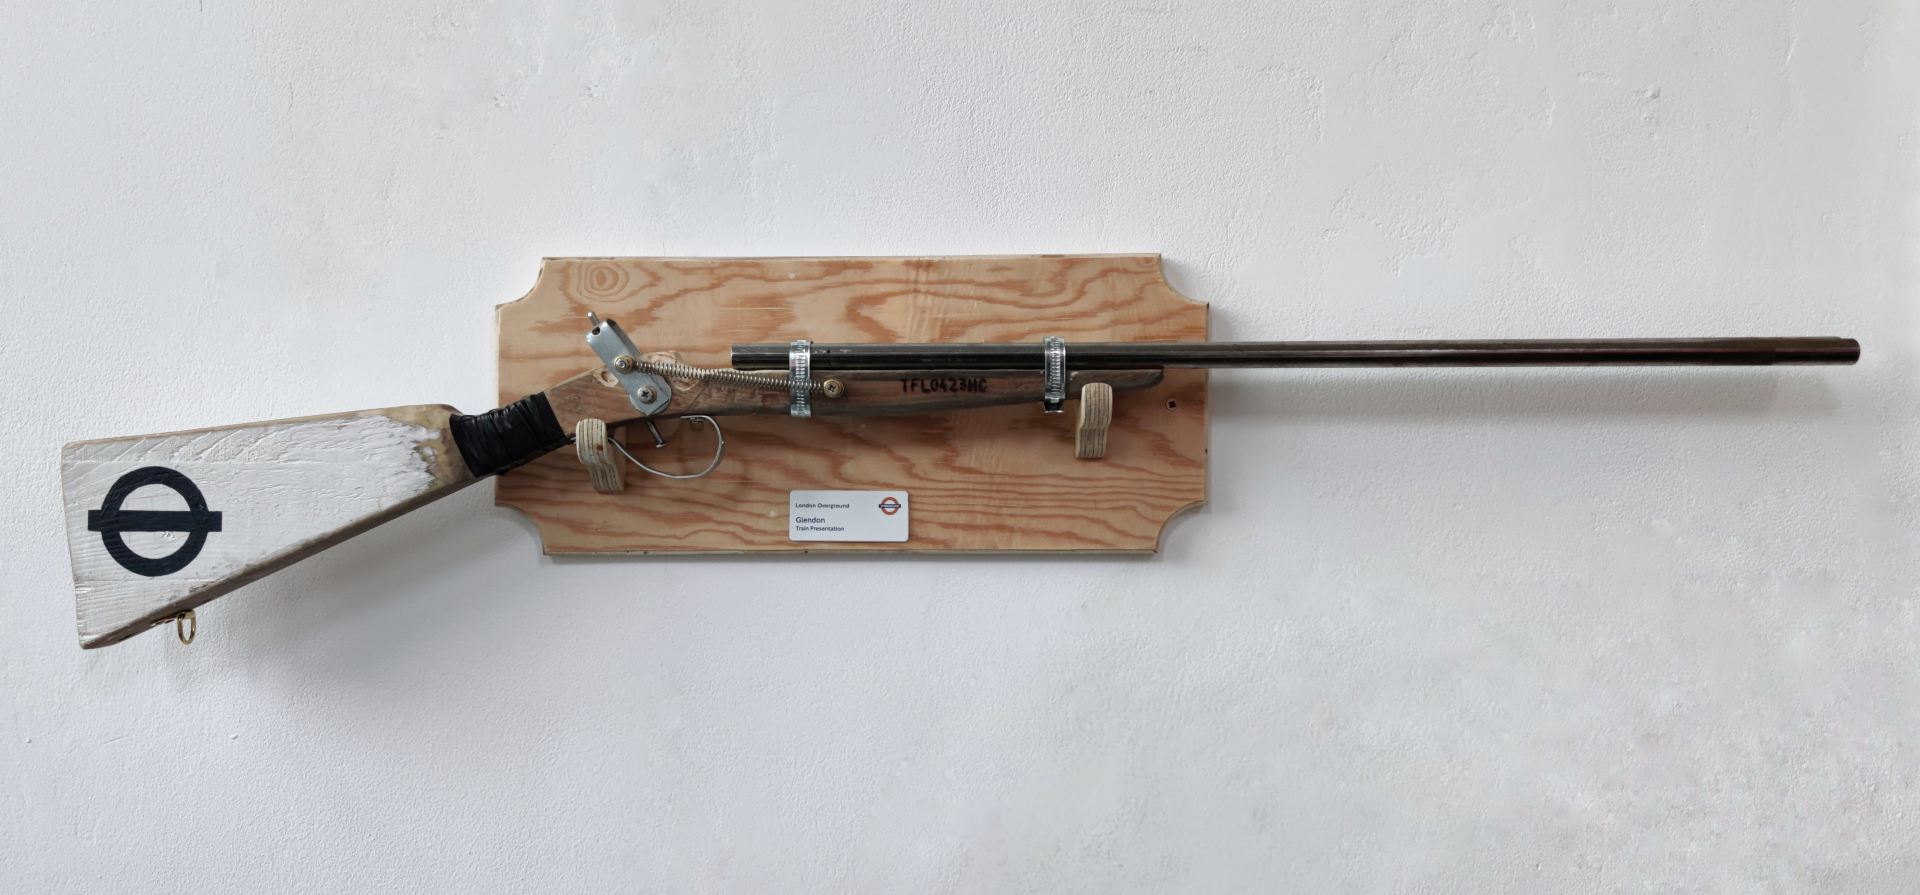 A replica shotgun, made from scavenged materials and hardware, with functional hammer mechanism. Branded with the TFL logo, this prop belongs to an overground staff member named Glendon (as shown on the wall-mounted stand).